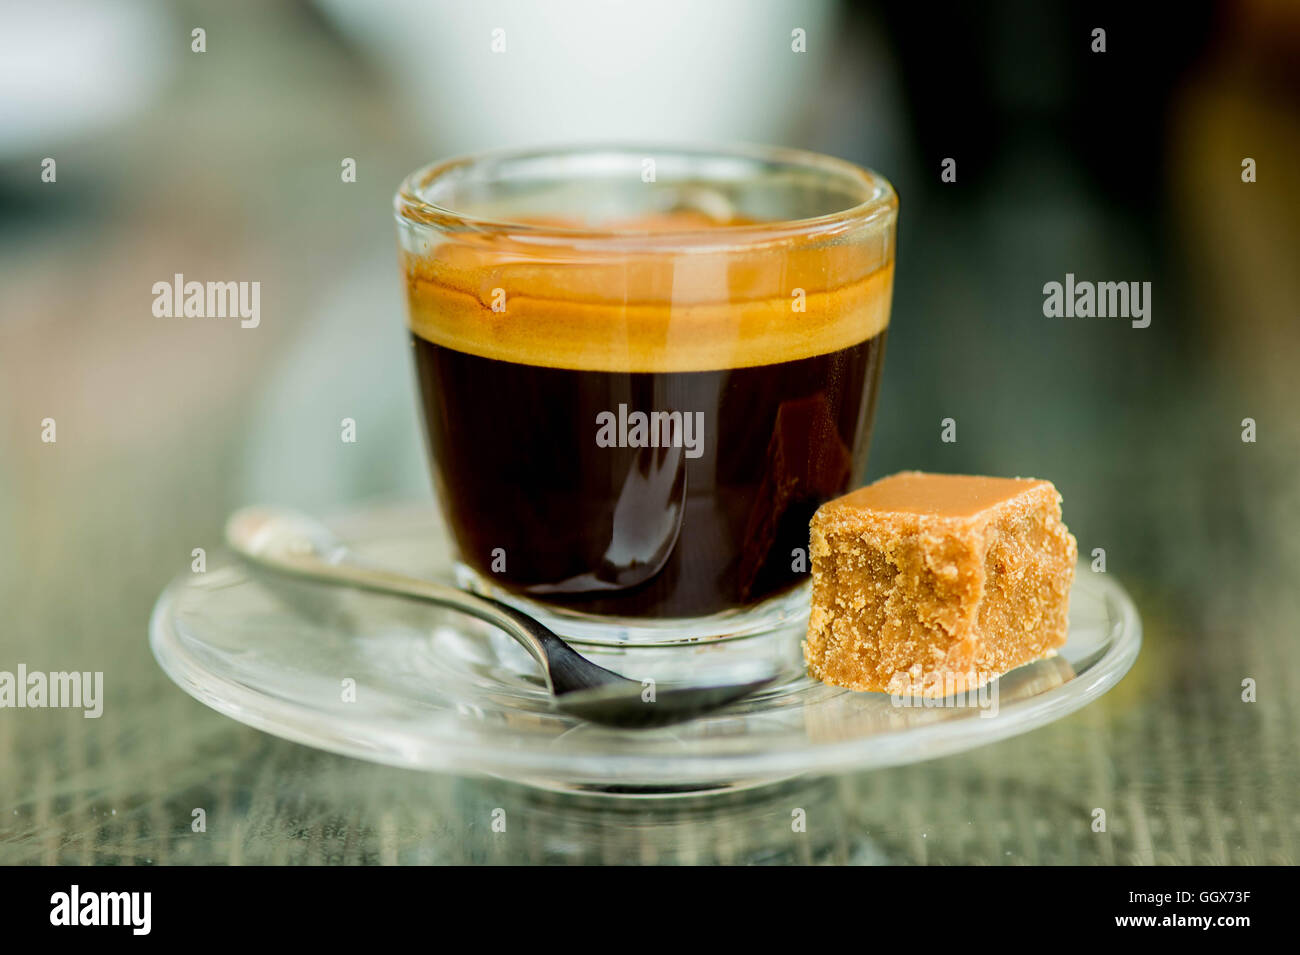 https://c8.alamy.com/comp/GGX73F/starting-the-day-with-a-freshly-brewed-or-made-cup-of-strong-refreshing-GGX73F.jpg